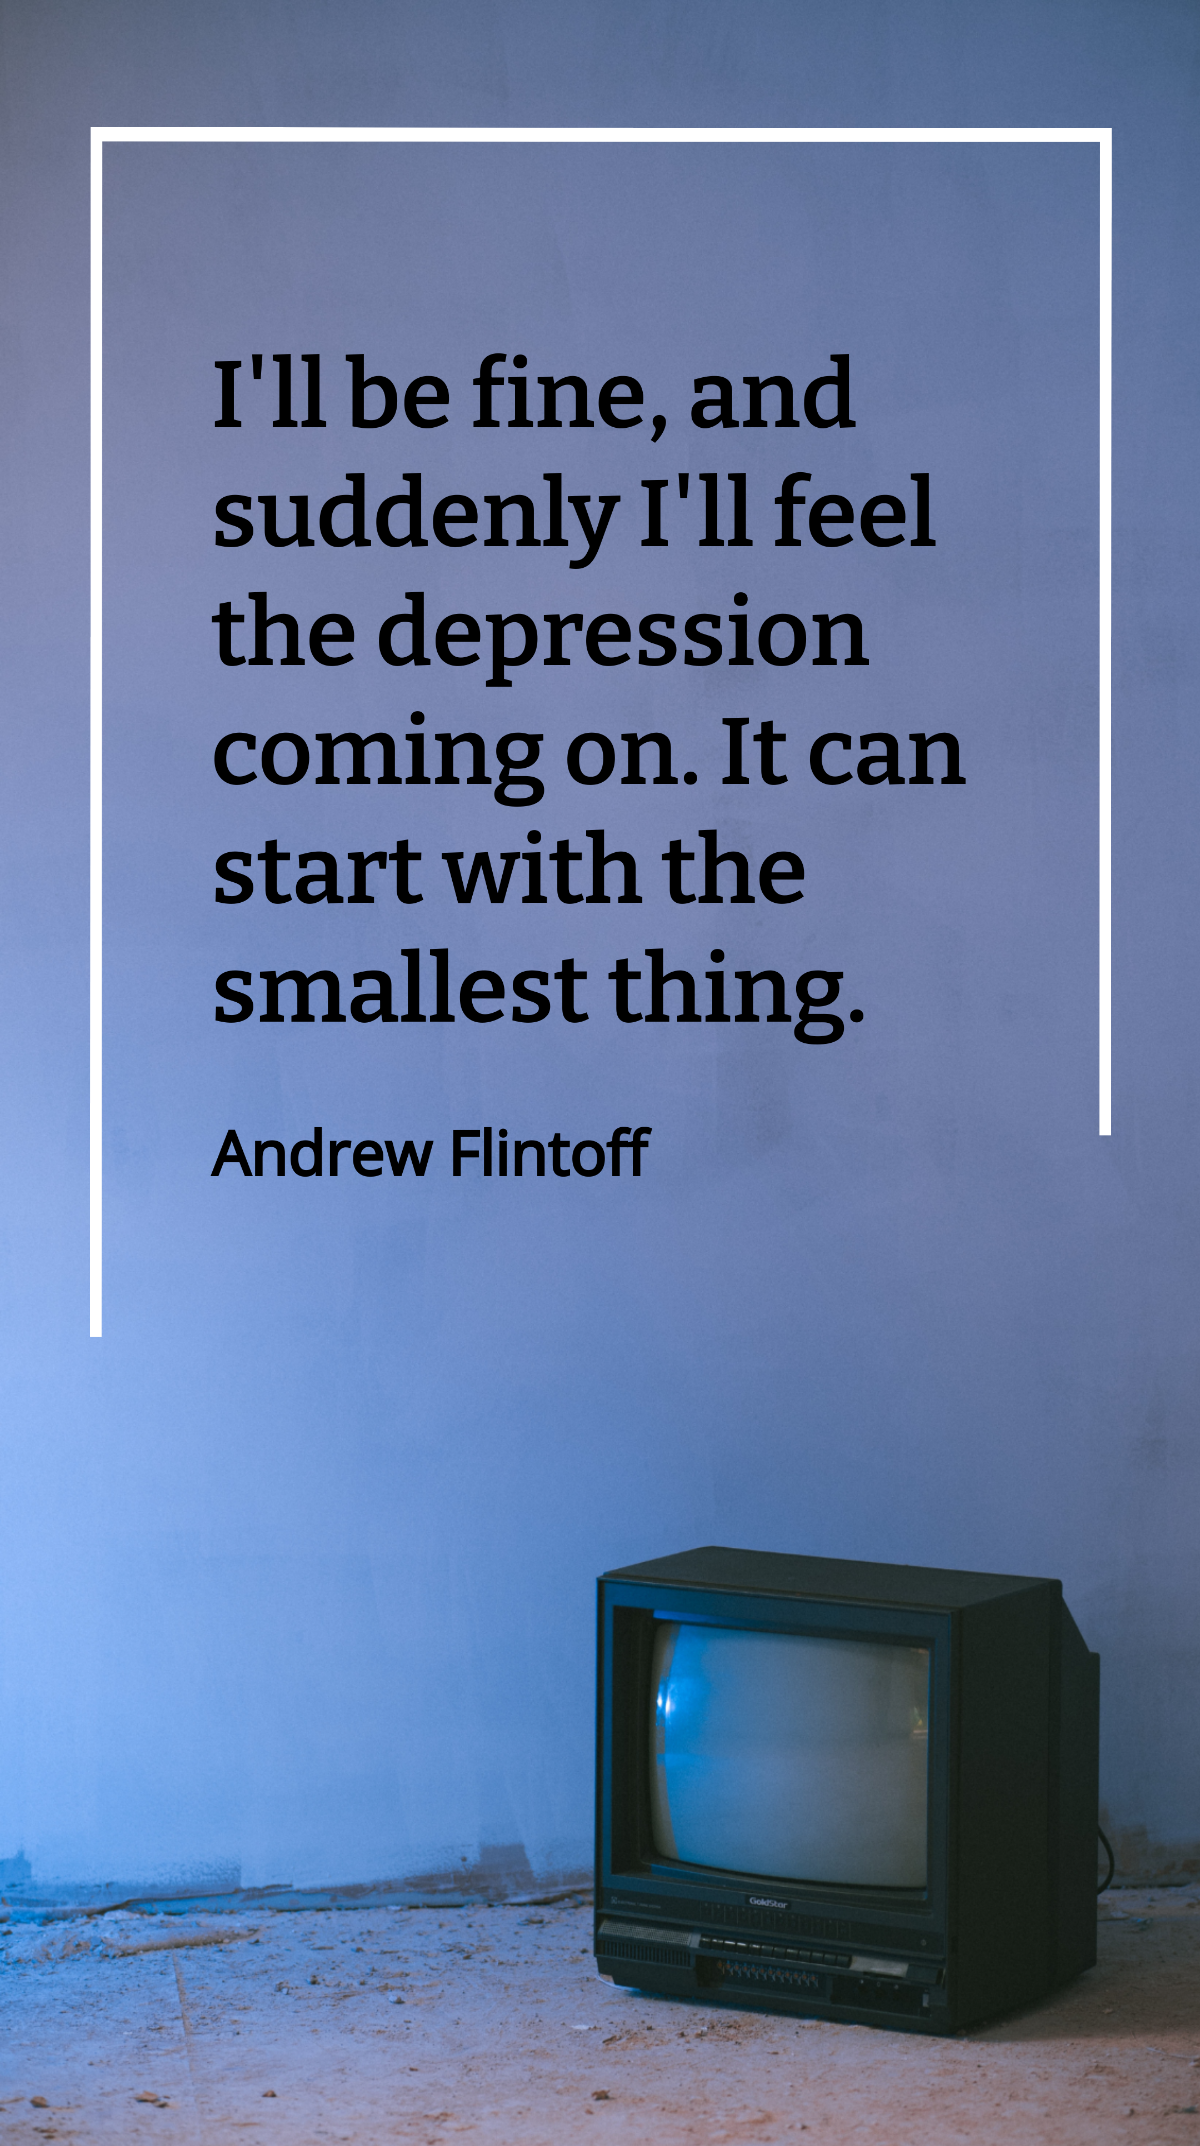 Andrew Flintoff - I'll be fine, and suddenly I'll feel the depression coming on. It can start with the smallest thing. Template